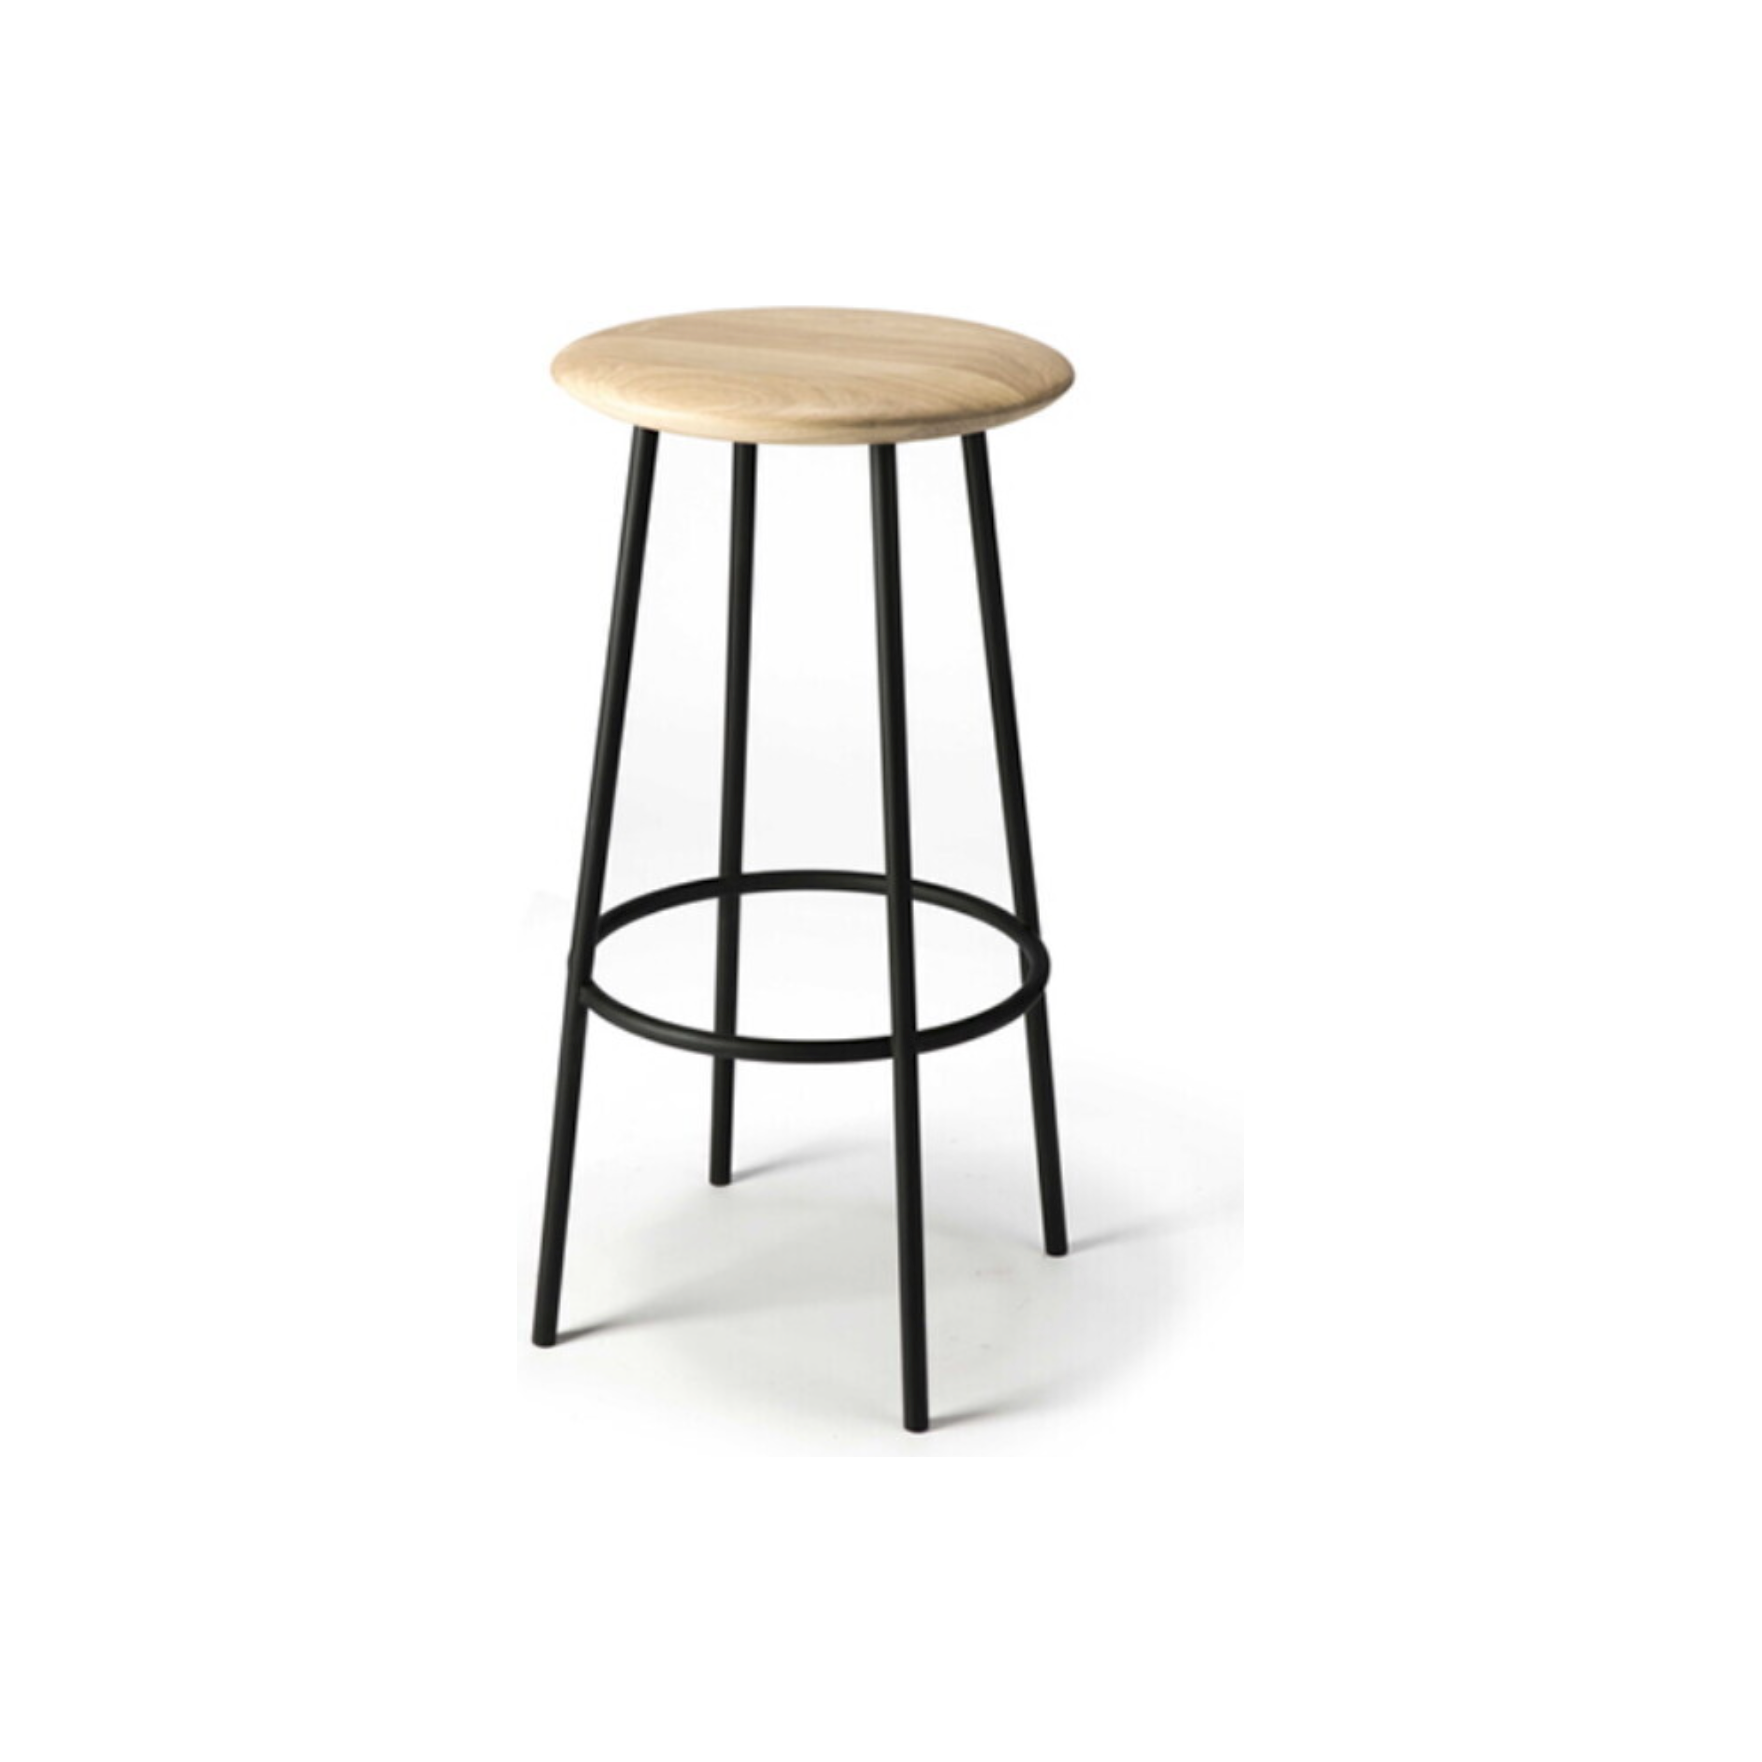 The Baretto bar stool, designed by Sascha Sartory, is lightweight in appearance, but solid in composition. We love that it features a slightly curved seat, which resembles a pillow, and it would make a comfy addition to any bar, kitchen or island!  Dimensions: 18.5"w x 18.5"d x 30"h  Seat Height: 30"  Material: Oak, 100% solid wood Finish: Varnished